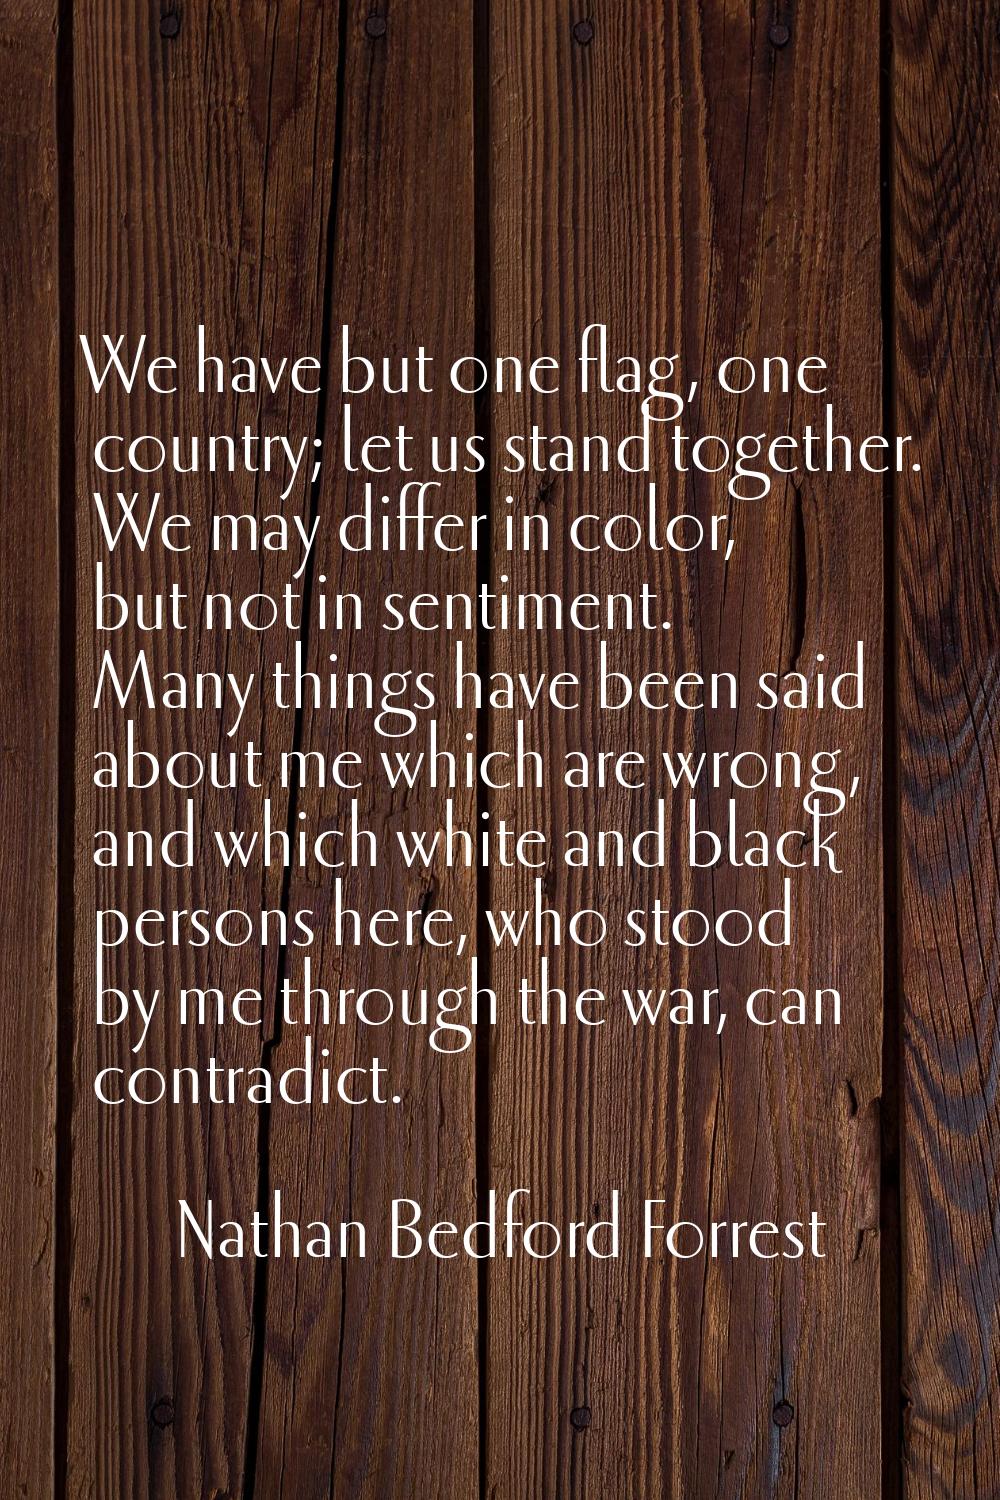 We have but one flag, one country; let us stand together. We may differ in color, but not in sentim